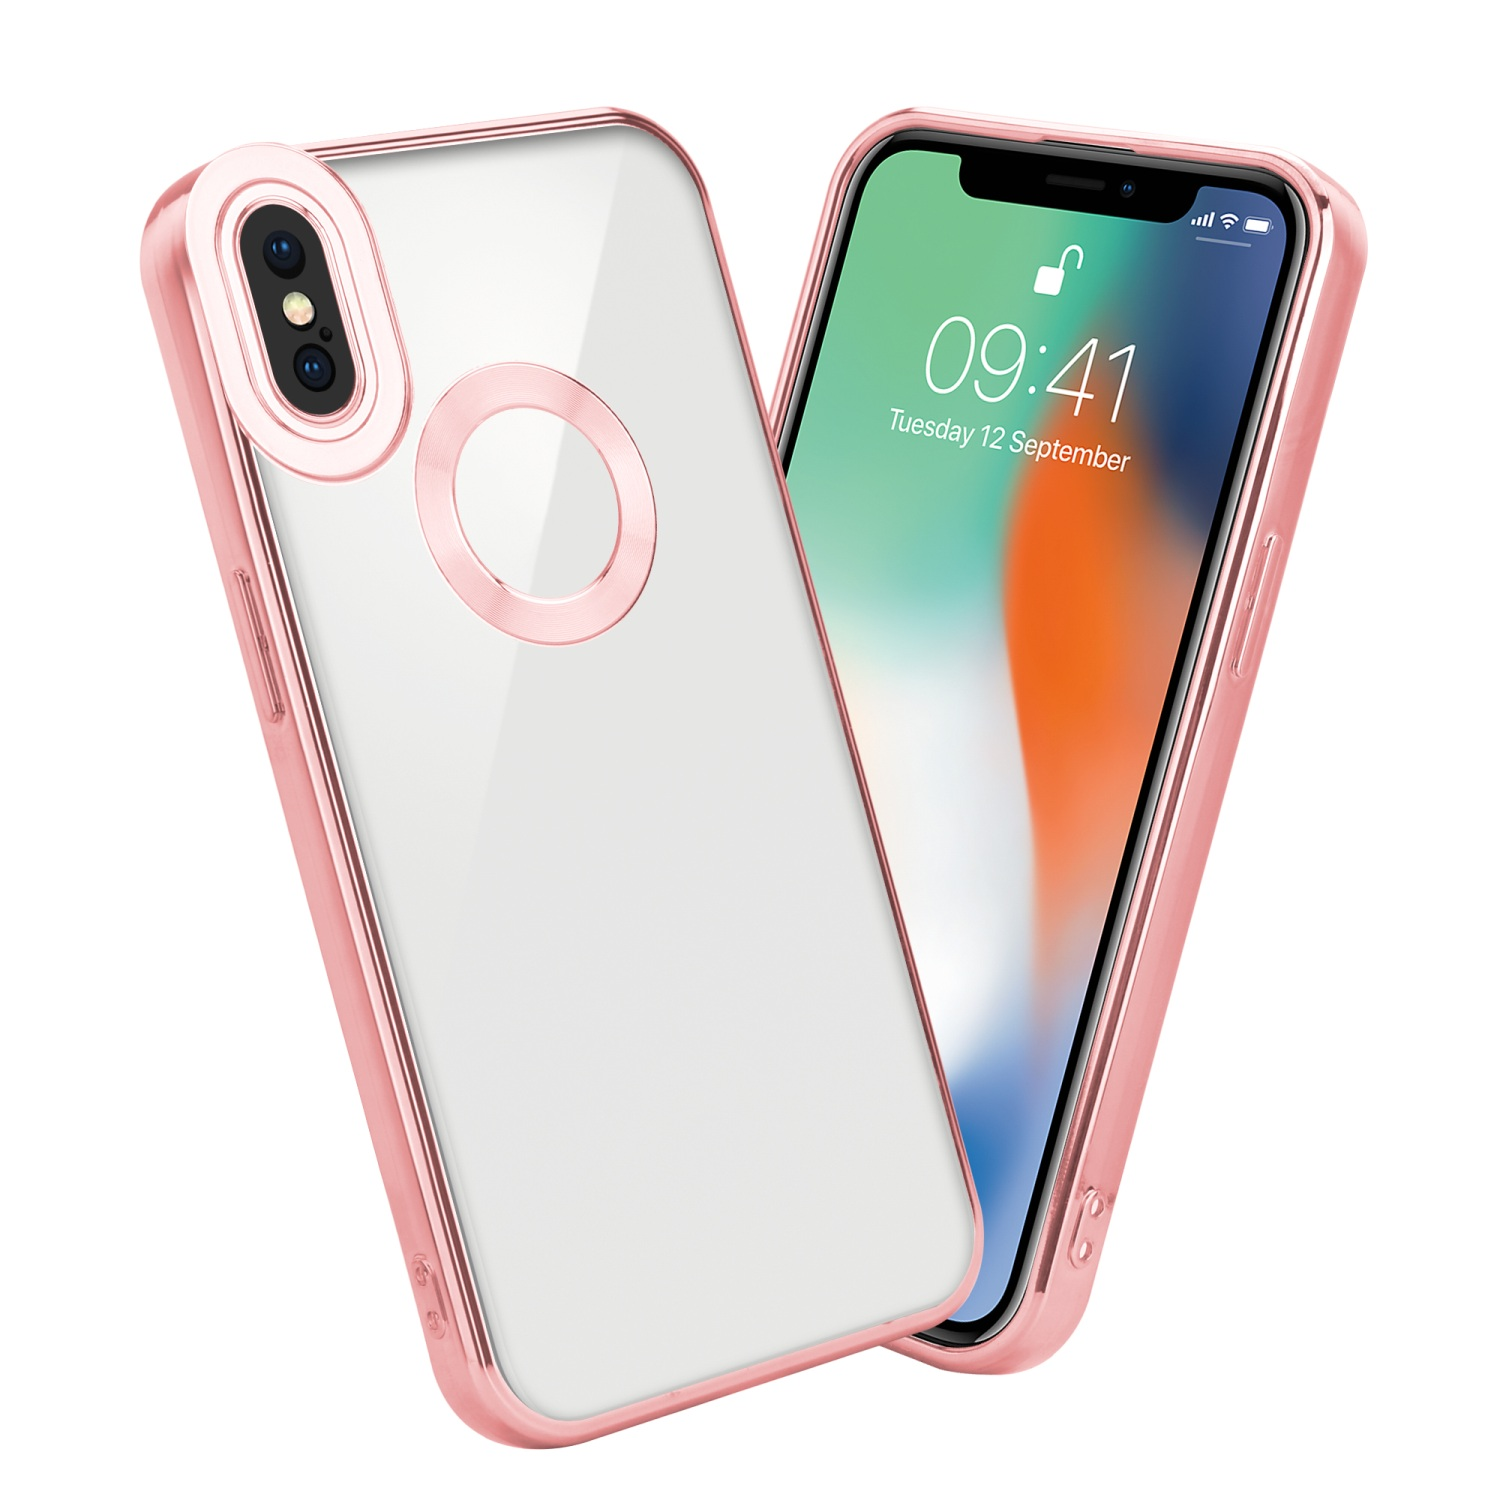 Chrome Handyhülle CADORABO mit Transparent - Applikation, Backcover, Rosa Apple, XS iPhone MAX,